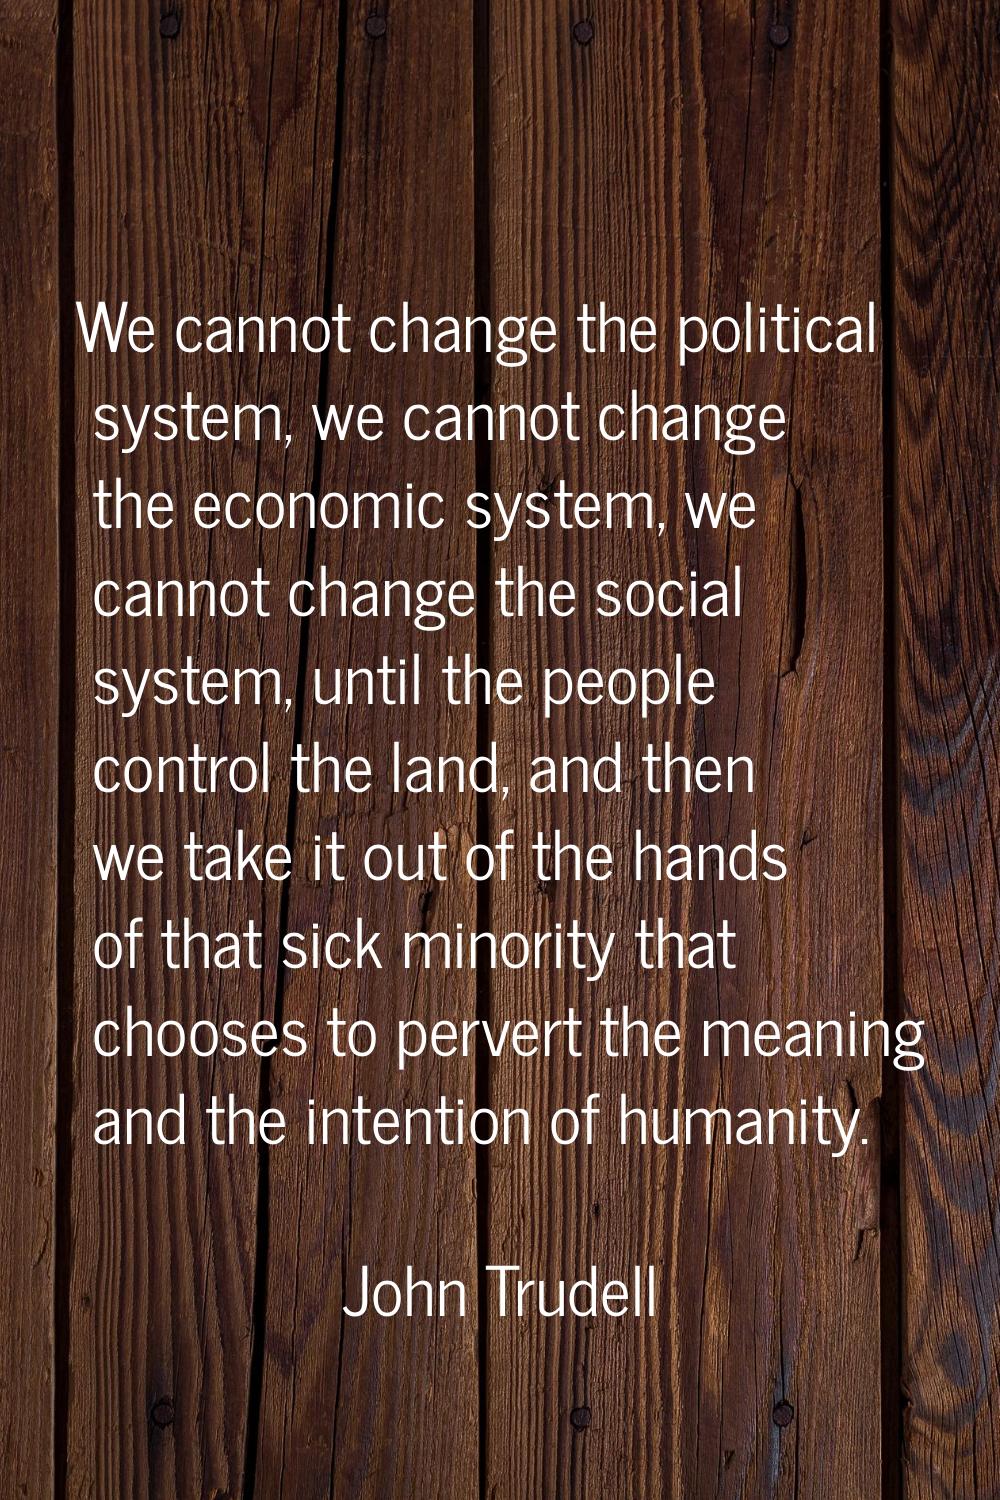 We cannot change the political system, we cannot change the economic system, we cannot change the s